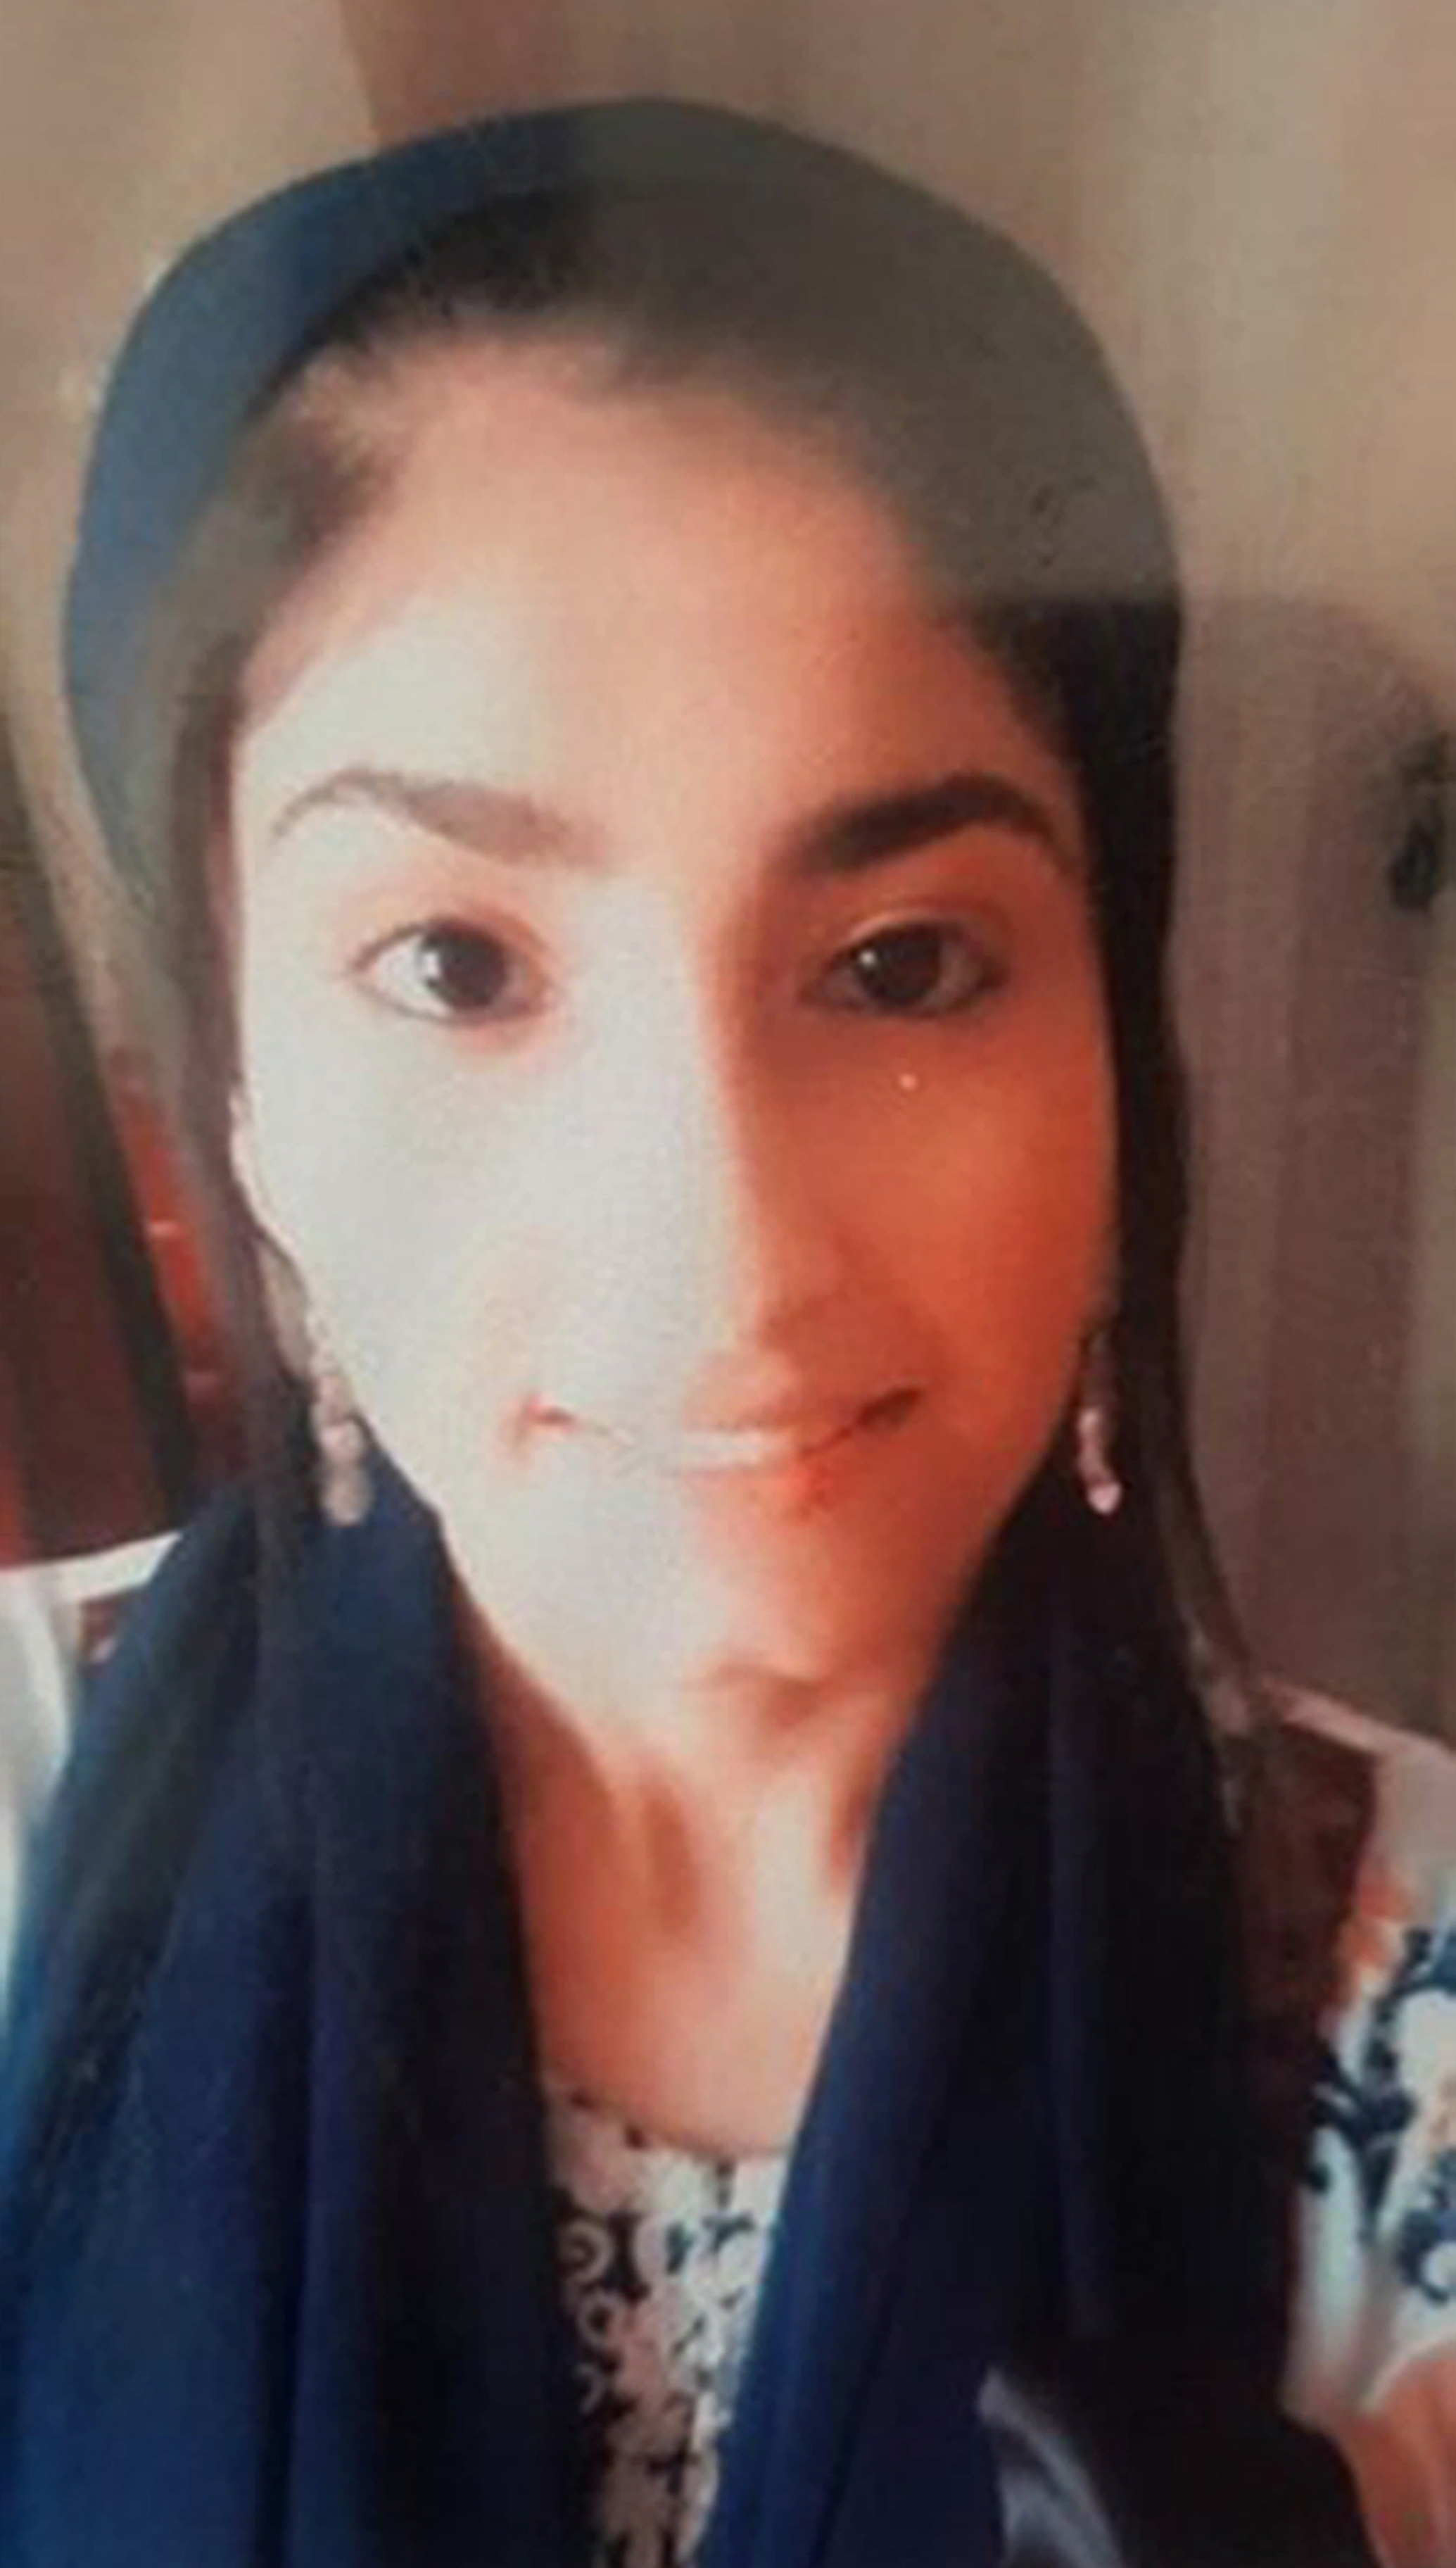 Somaiya Begum was murdered by her uncle in Leicester after she refused to marry a cousin in Pakistan